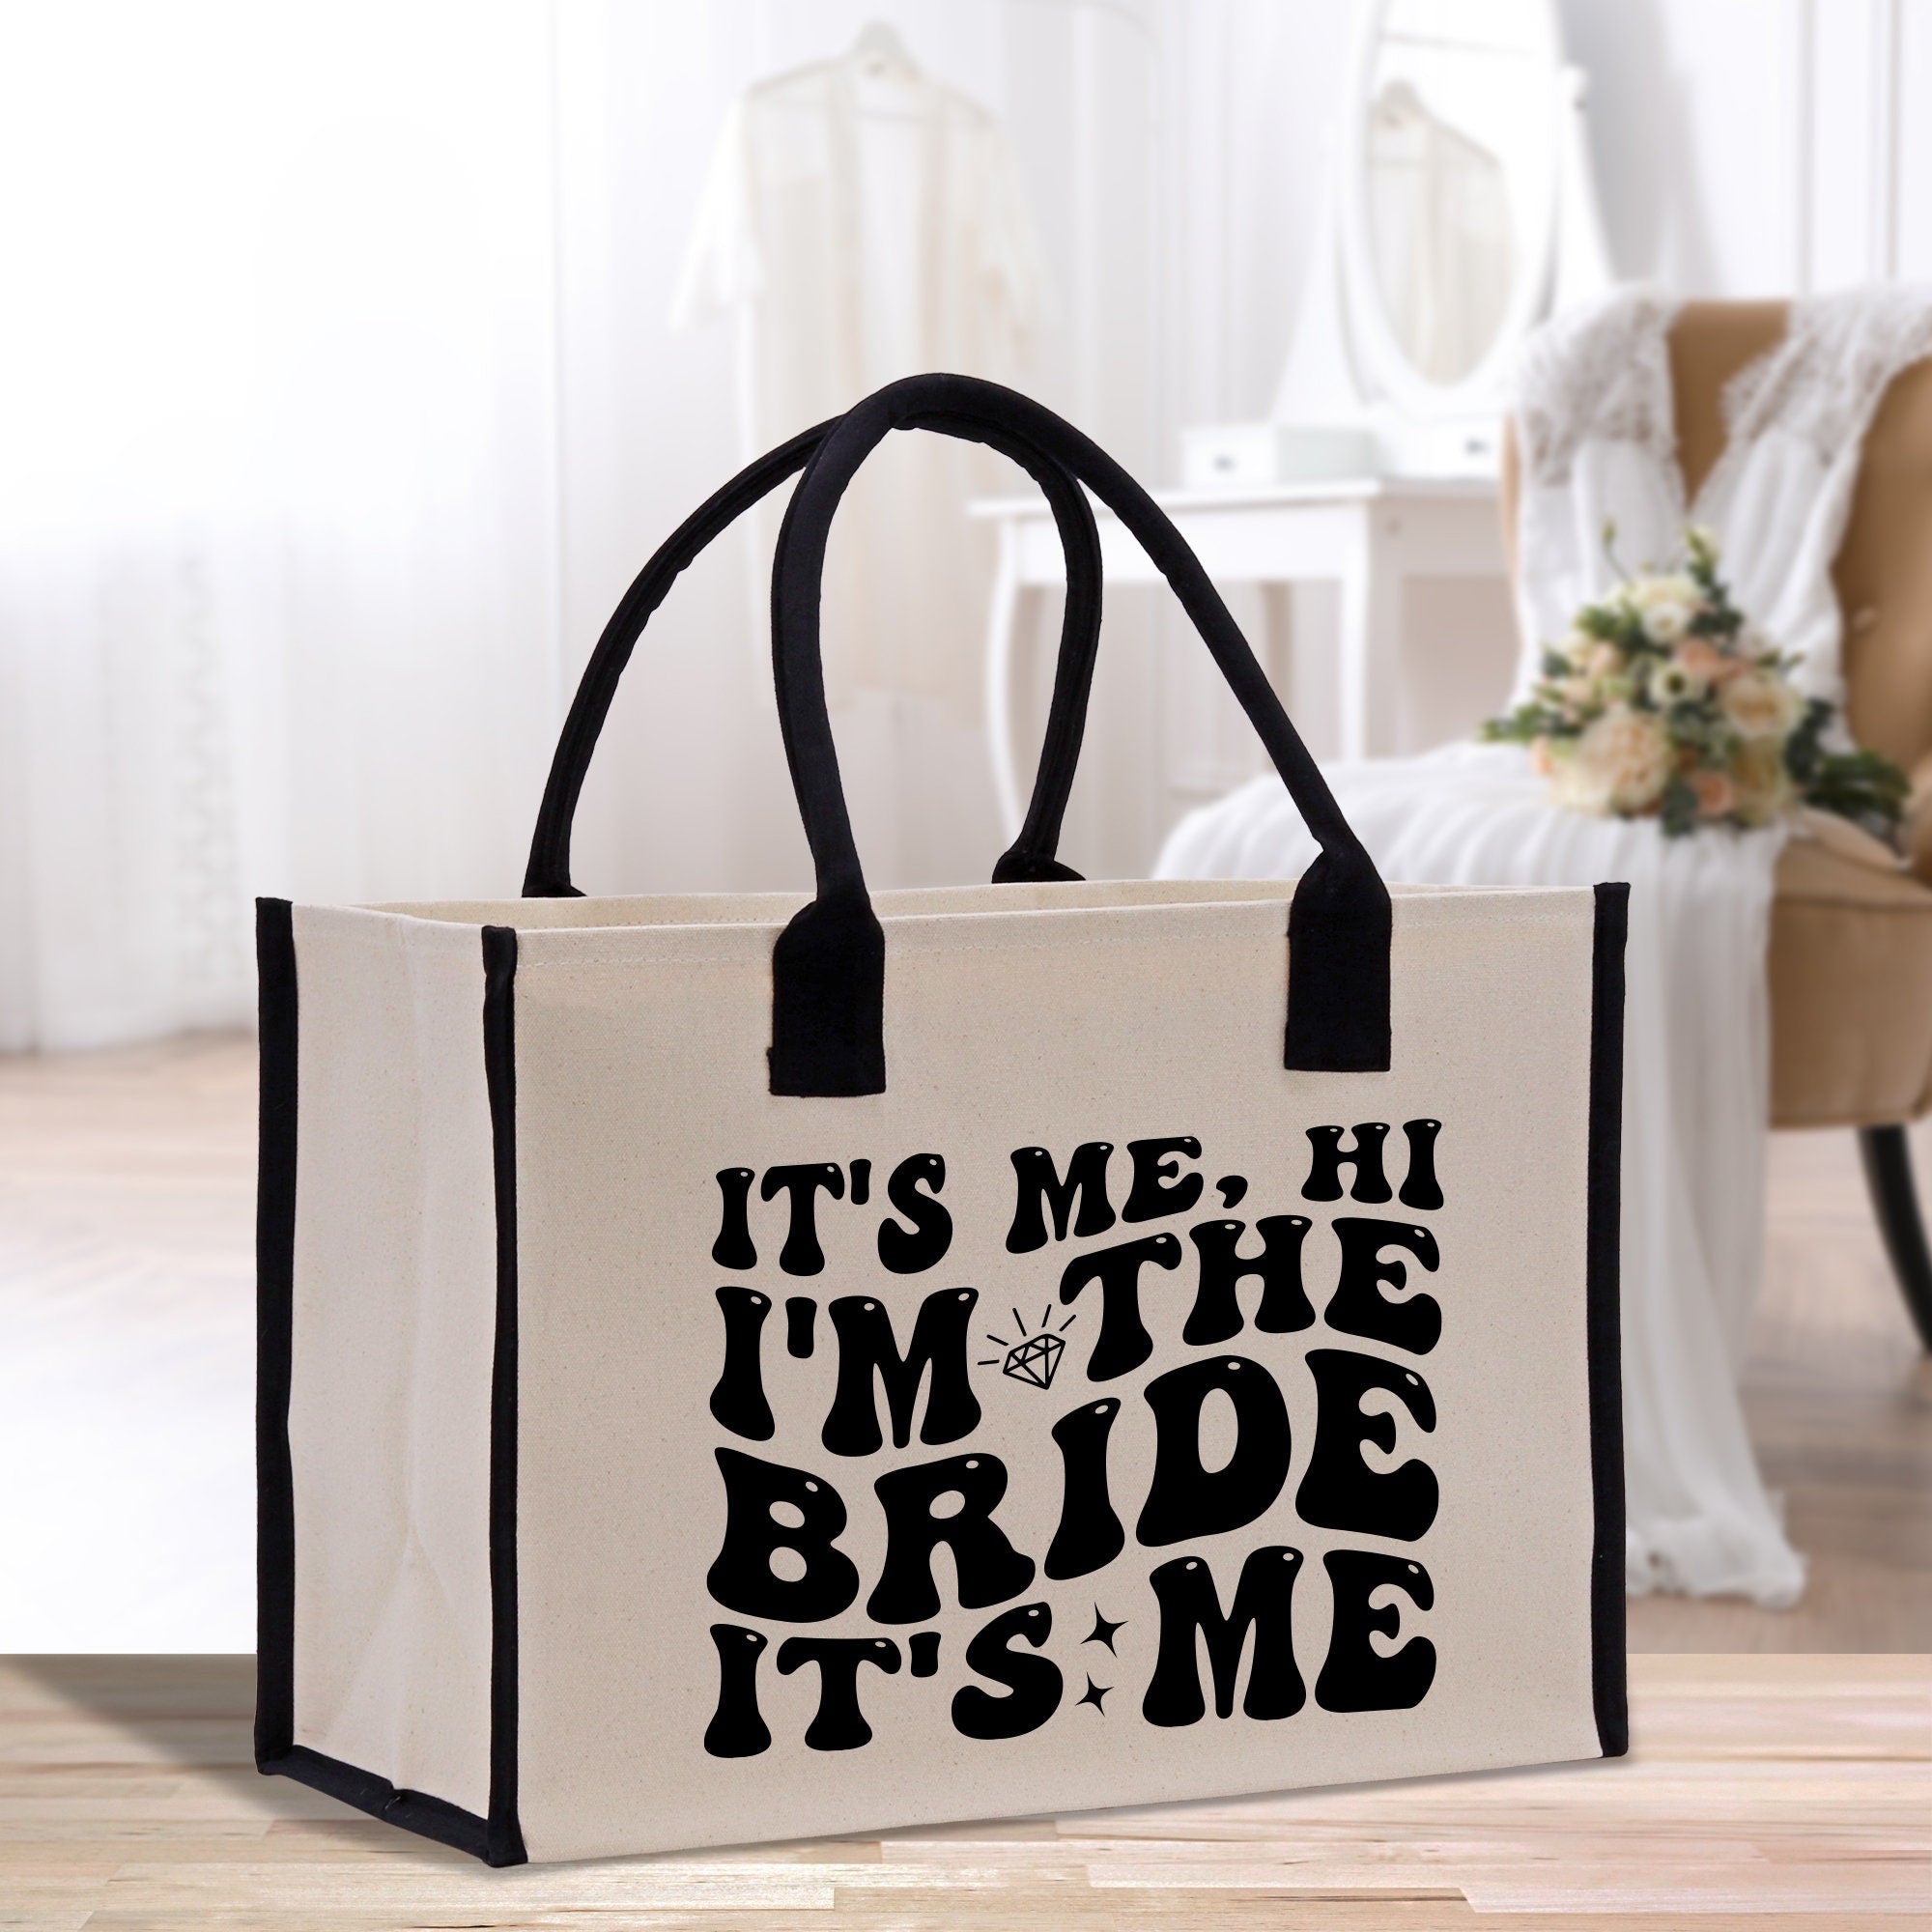 a white bag with black lettering on it